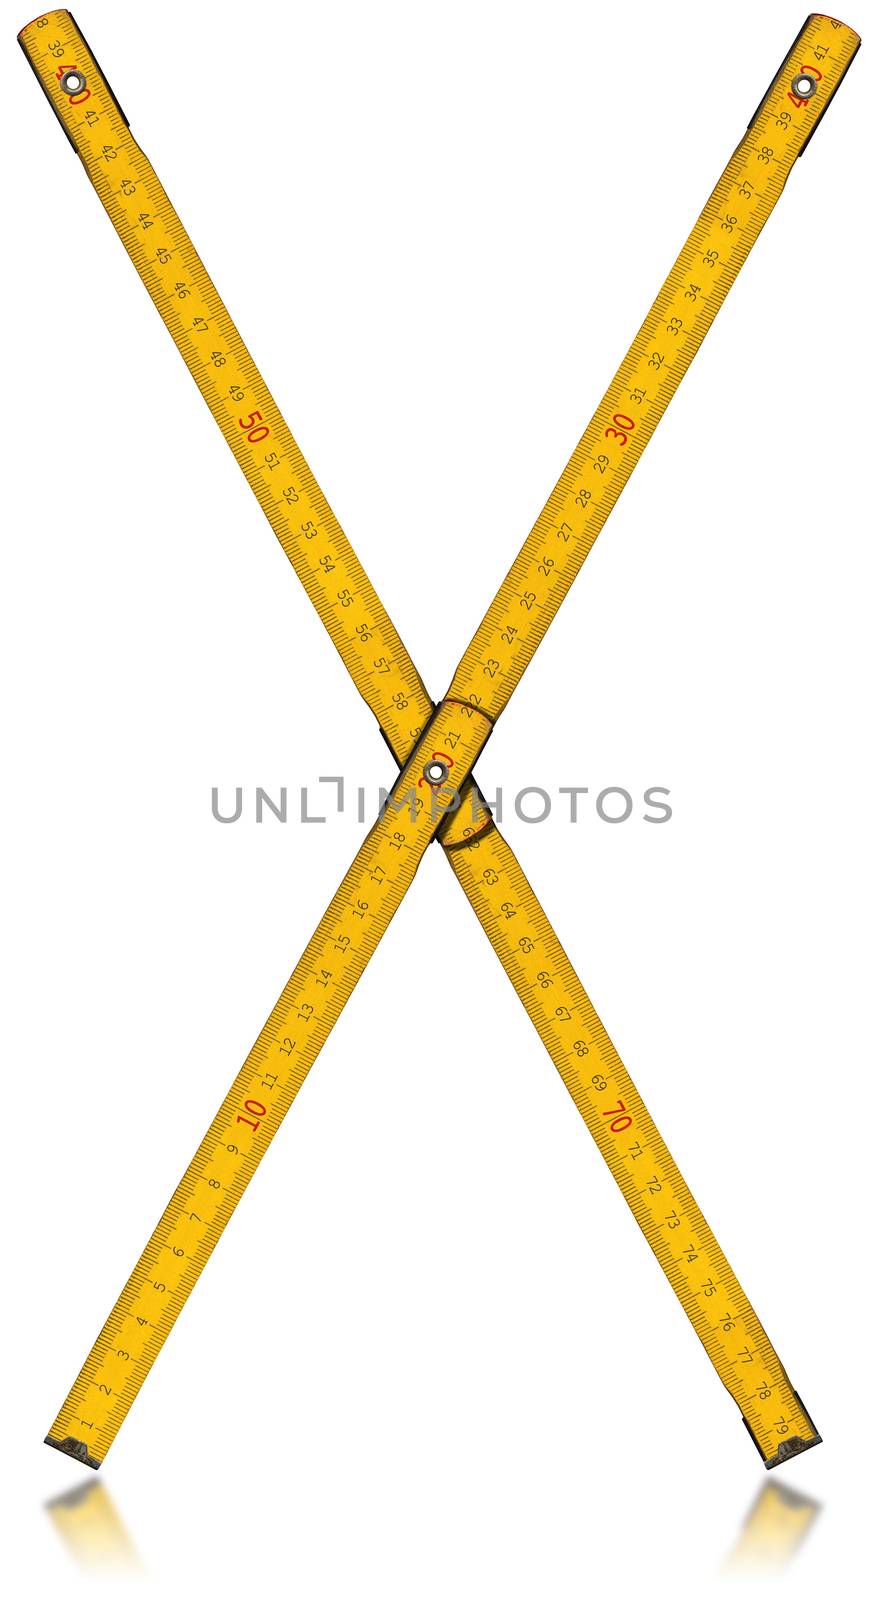 Old wooden yellow meter in the shape of letter X. Isolated on white background